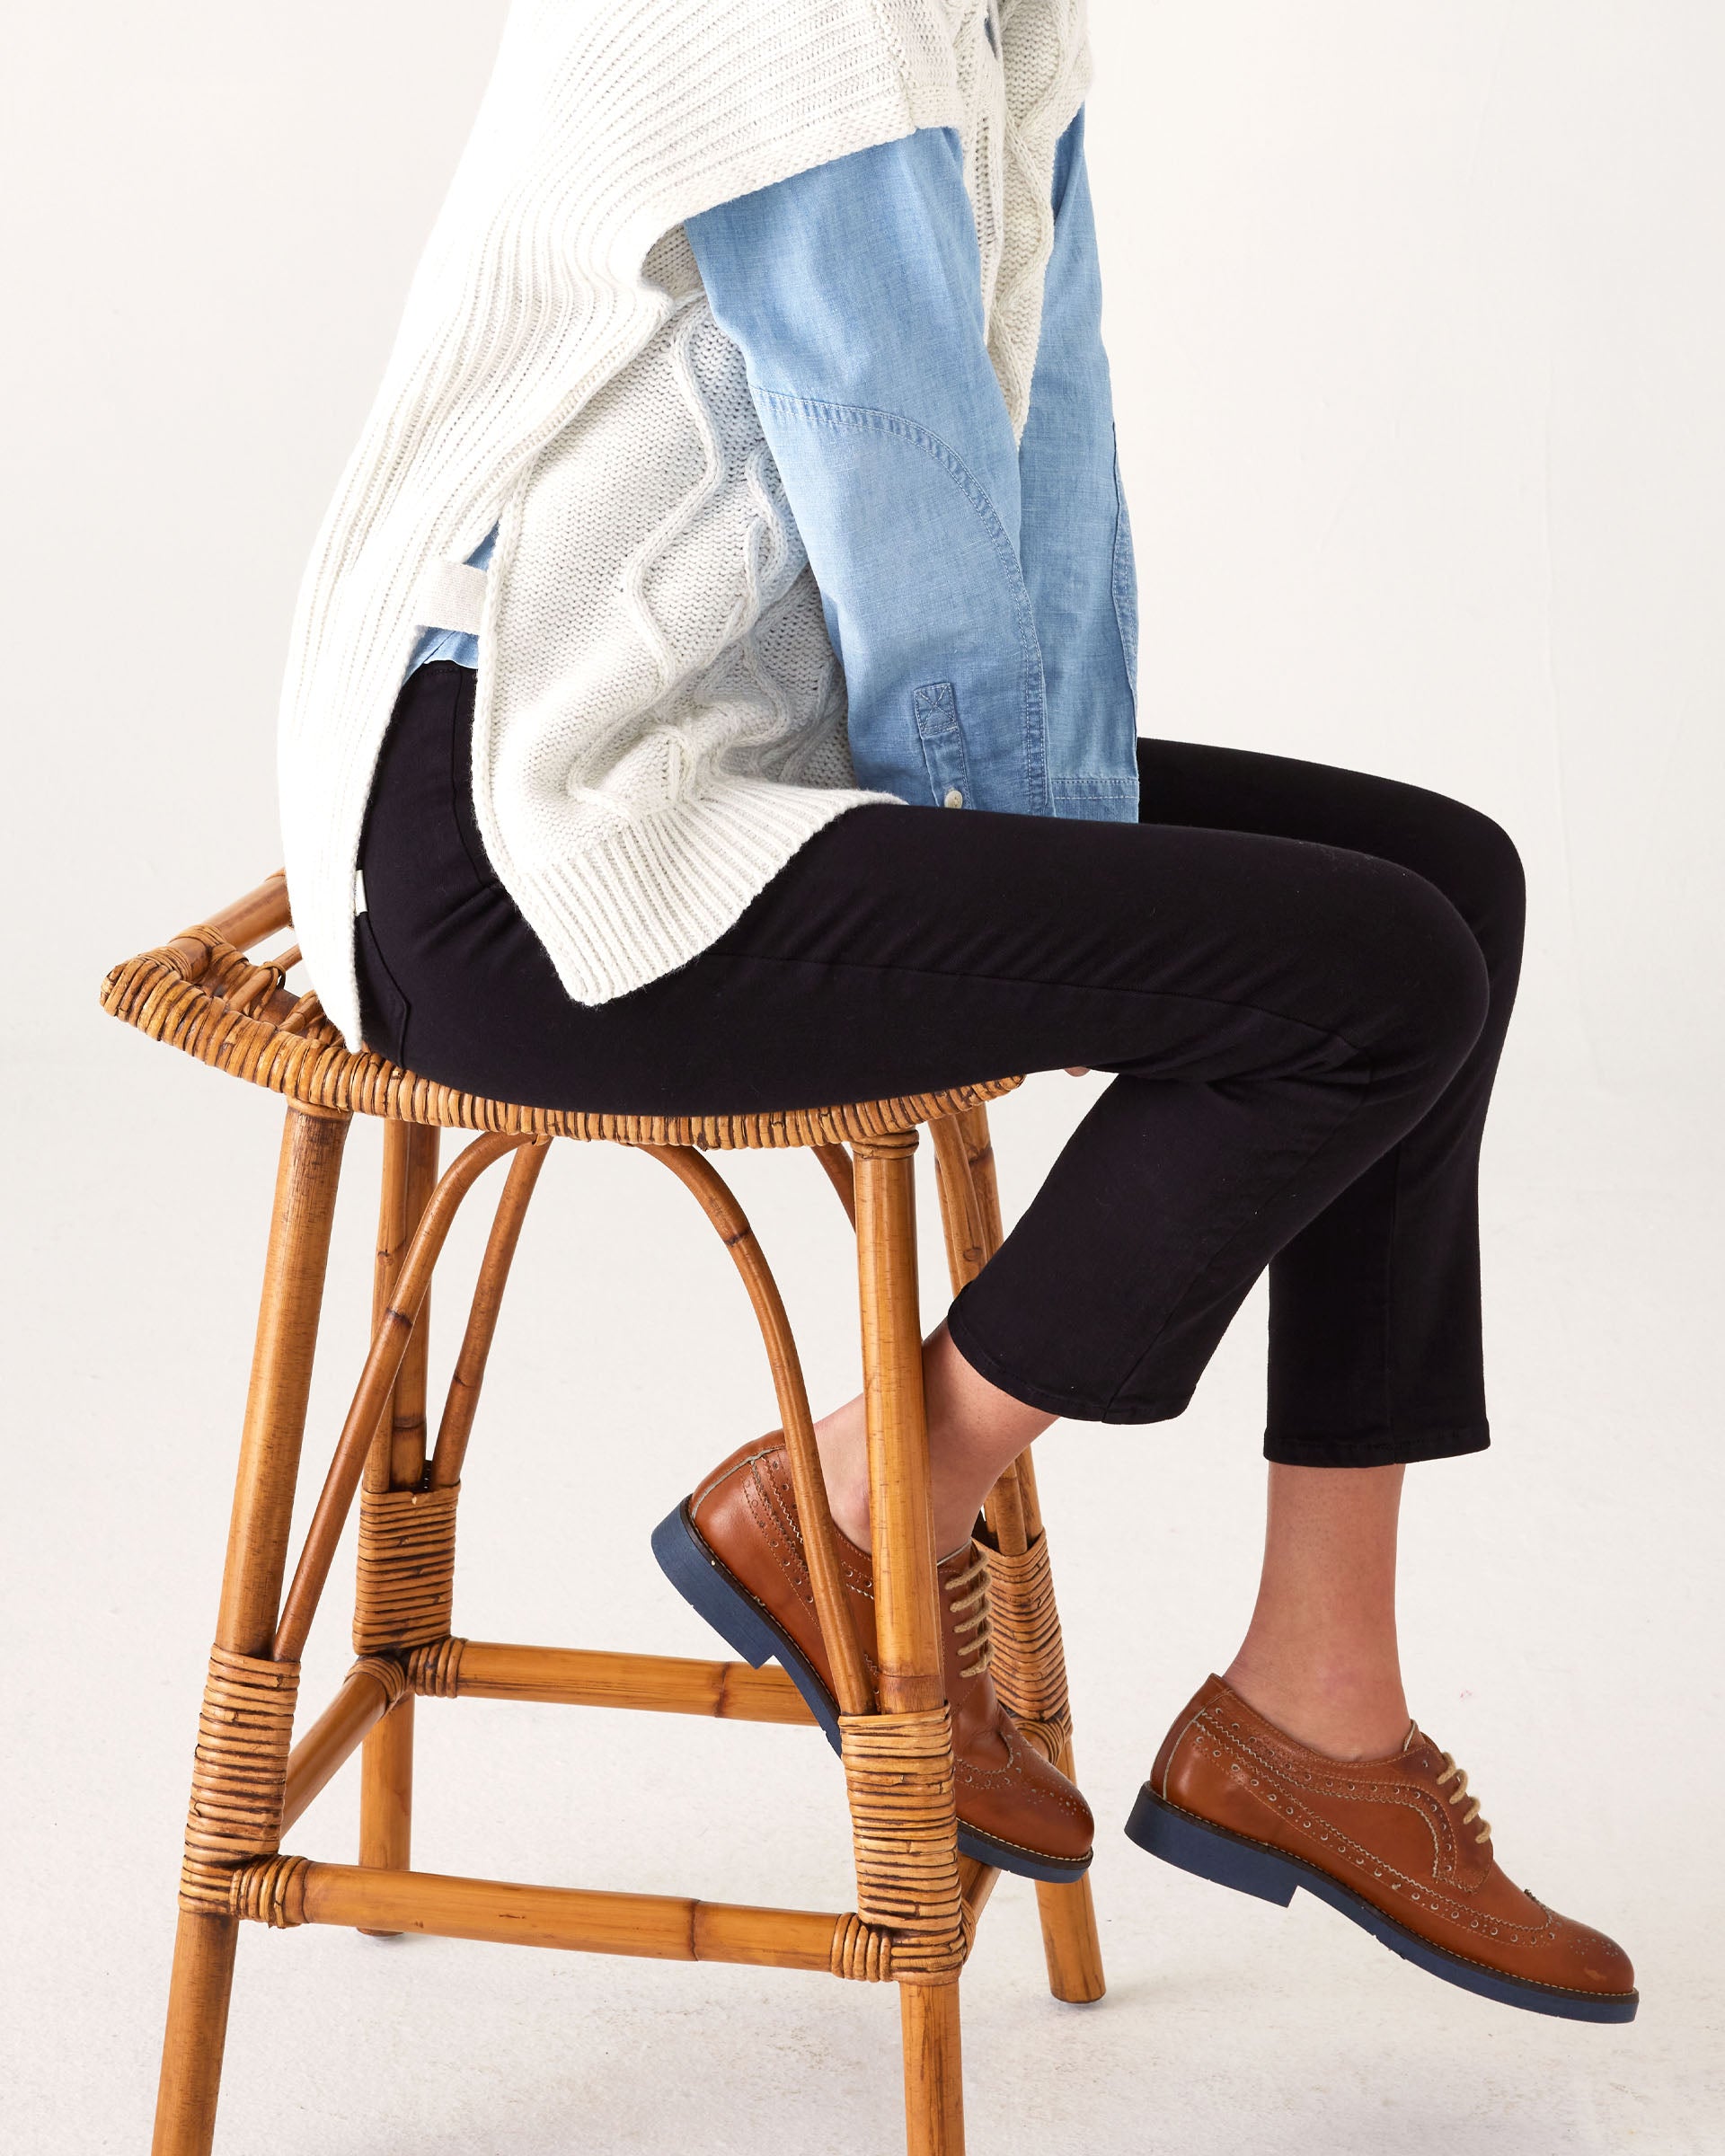 Close-up of lower body: Woman wearing Mersea Nomad black ankle cigarette jeans, sitting on stool against a white background